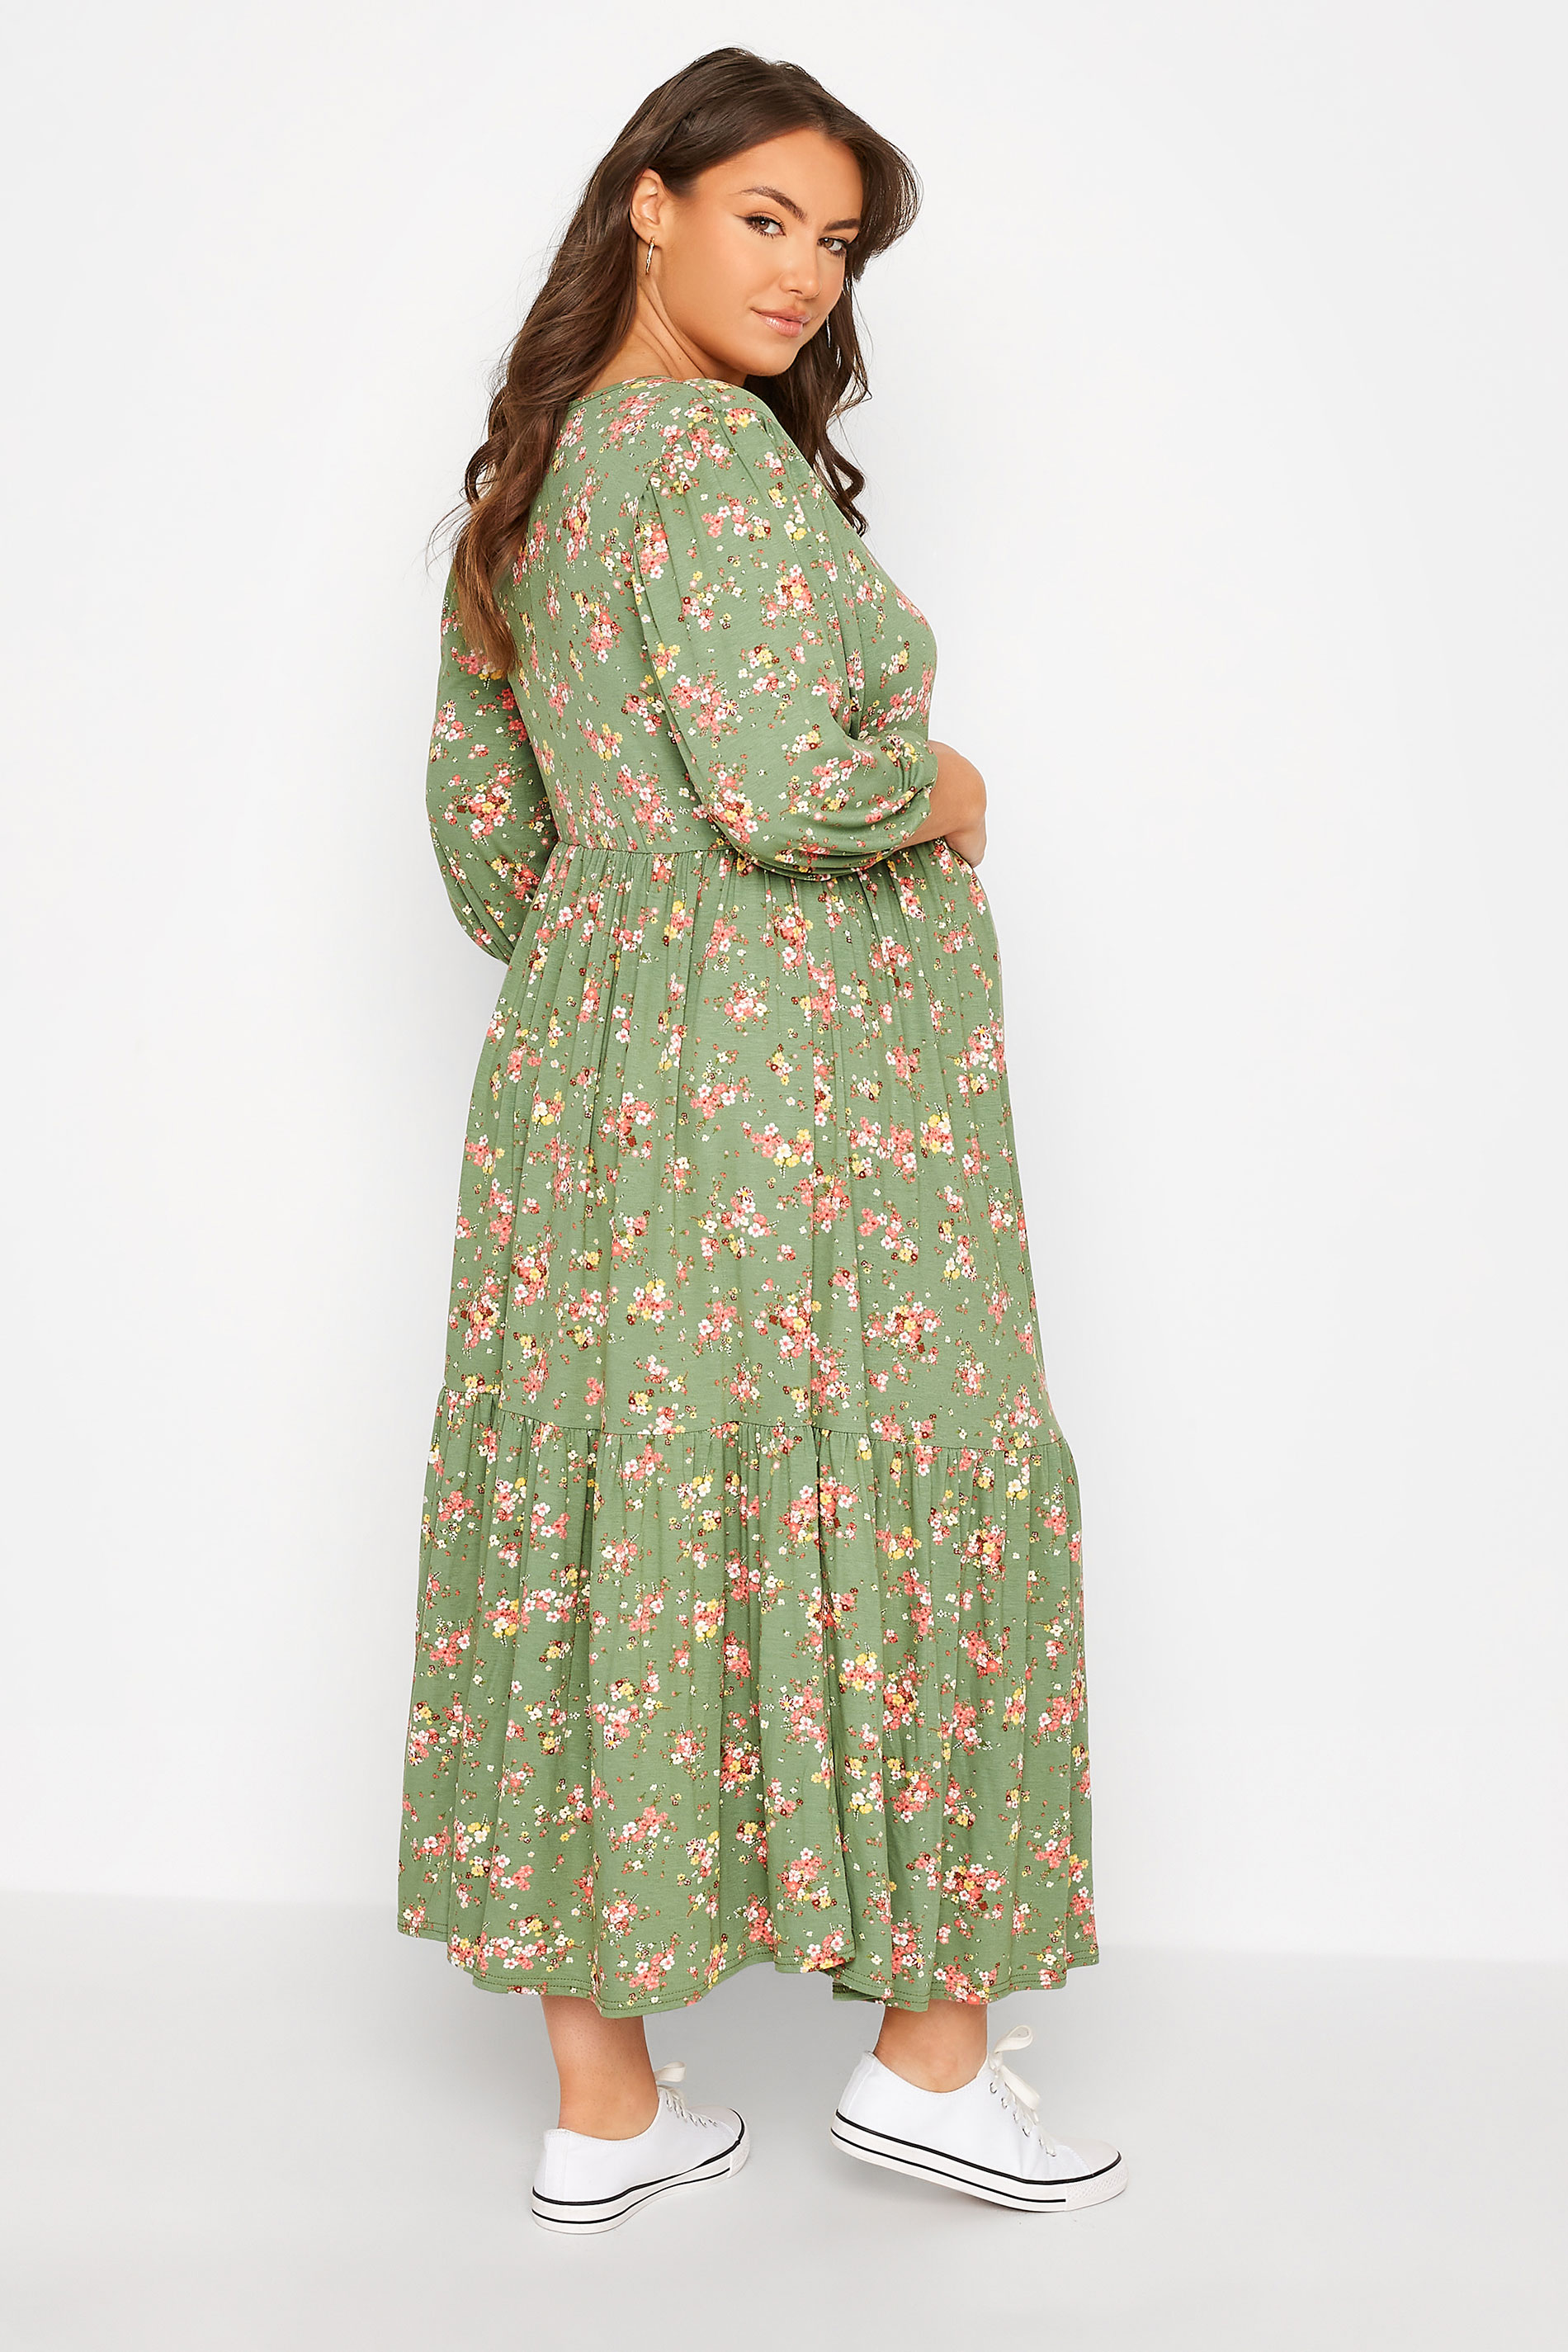 BUMP IT UP MATERNITY Plus Size Green Floral Print Tiered Wrap Dress | Yours Clothing  3